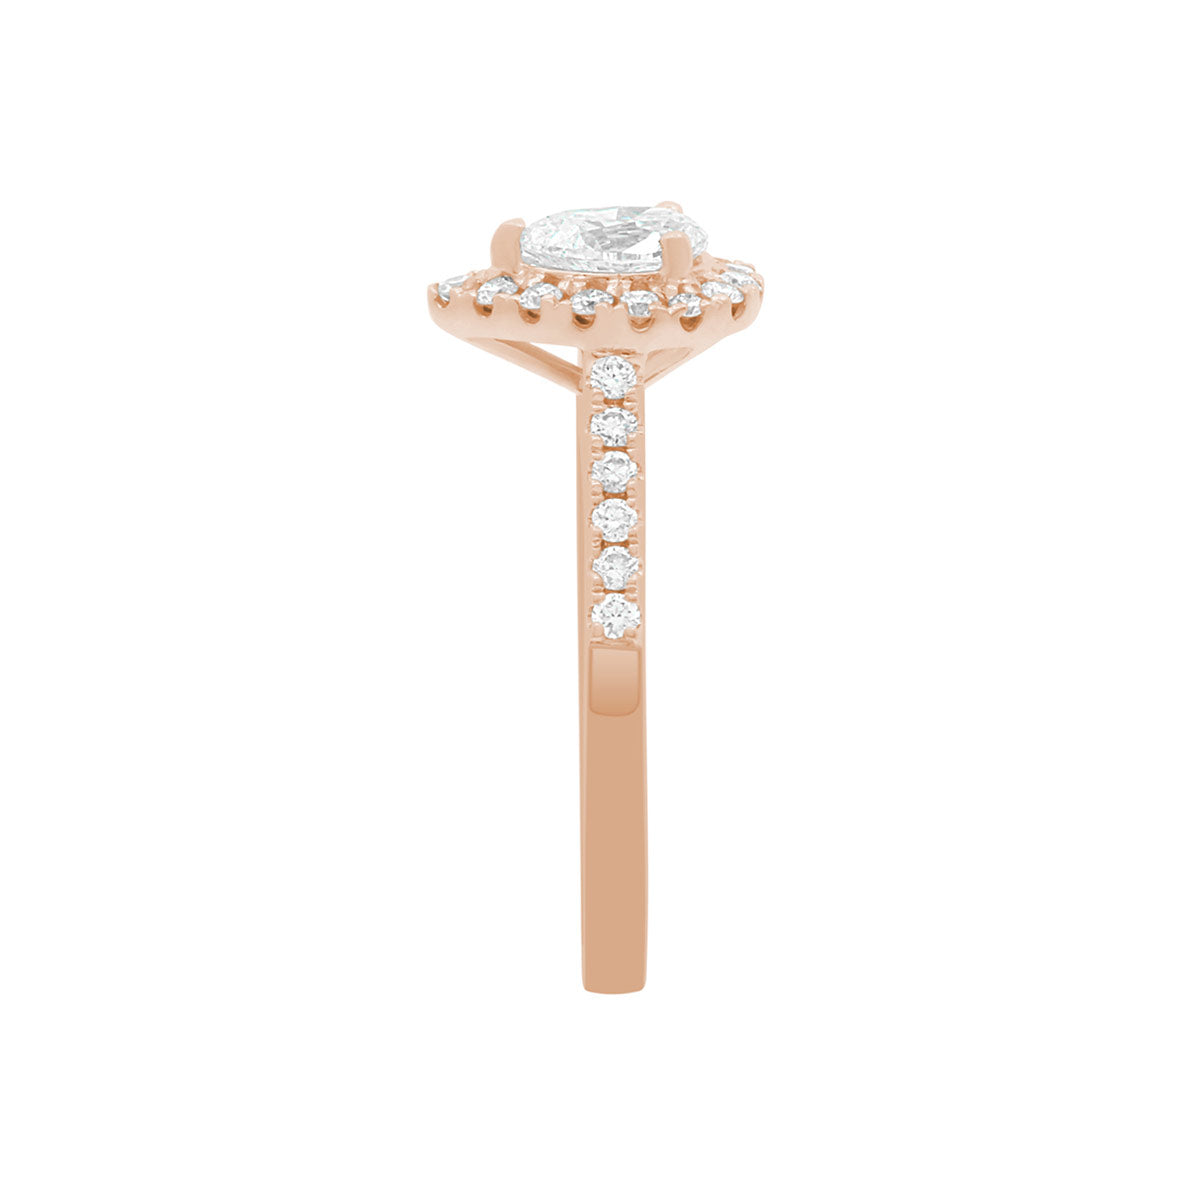 Pear Cut Halo Ring in rose gold, standing upright, side perspective, on A WHITE SURFACE WITH A WHITE BACKGROUND